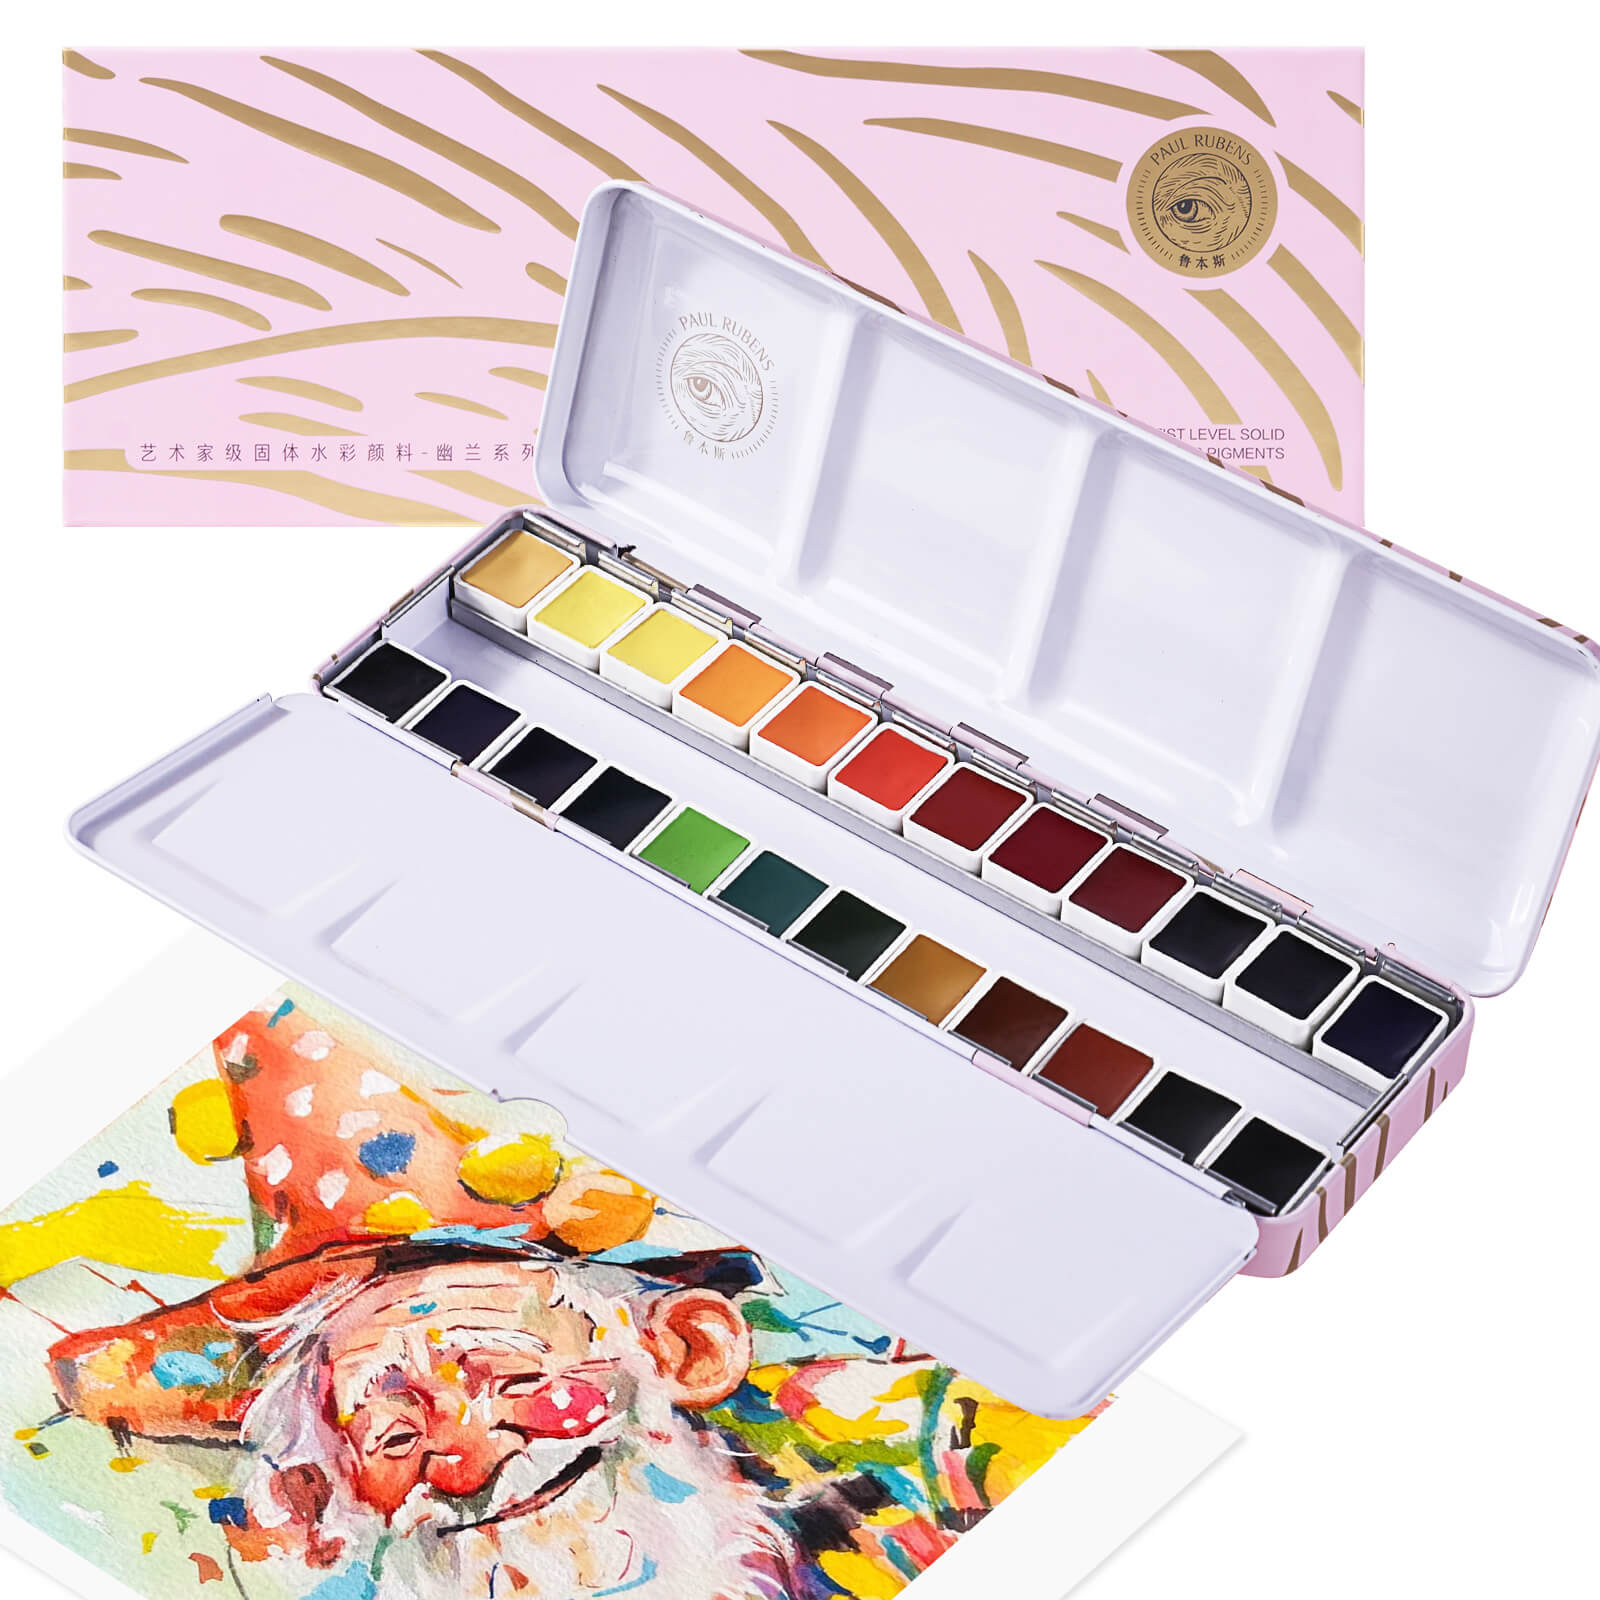 Paul Rubens Professional Watercolor Paint Set, 24 Vibrant Colors in Portable Tin Box(Pink and Gold)